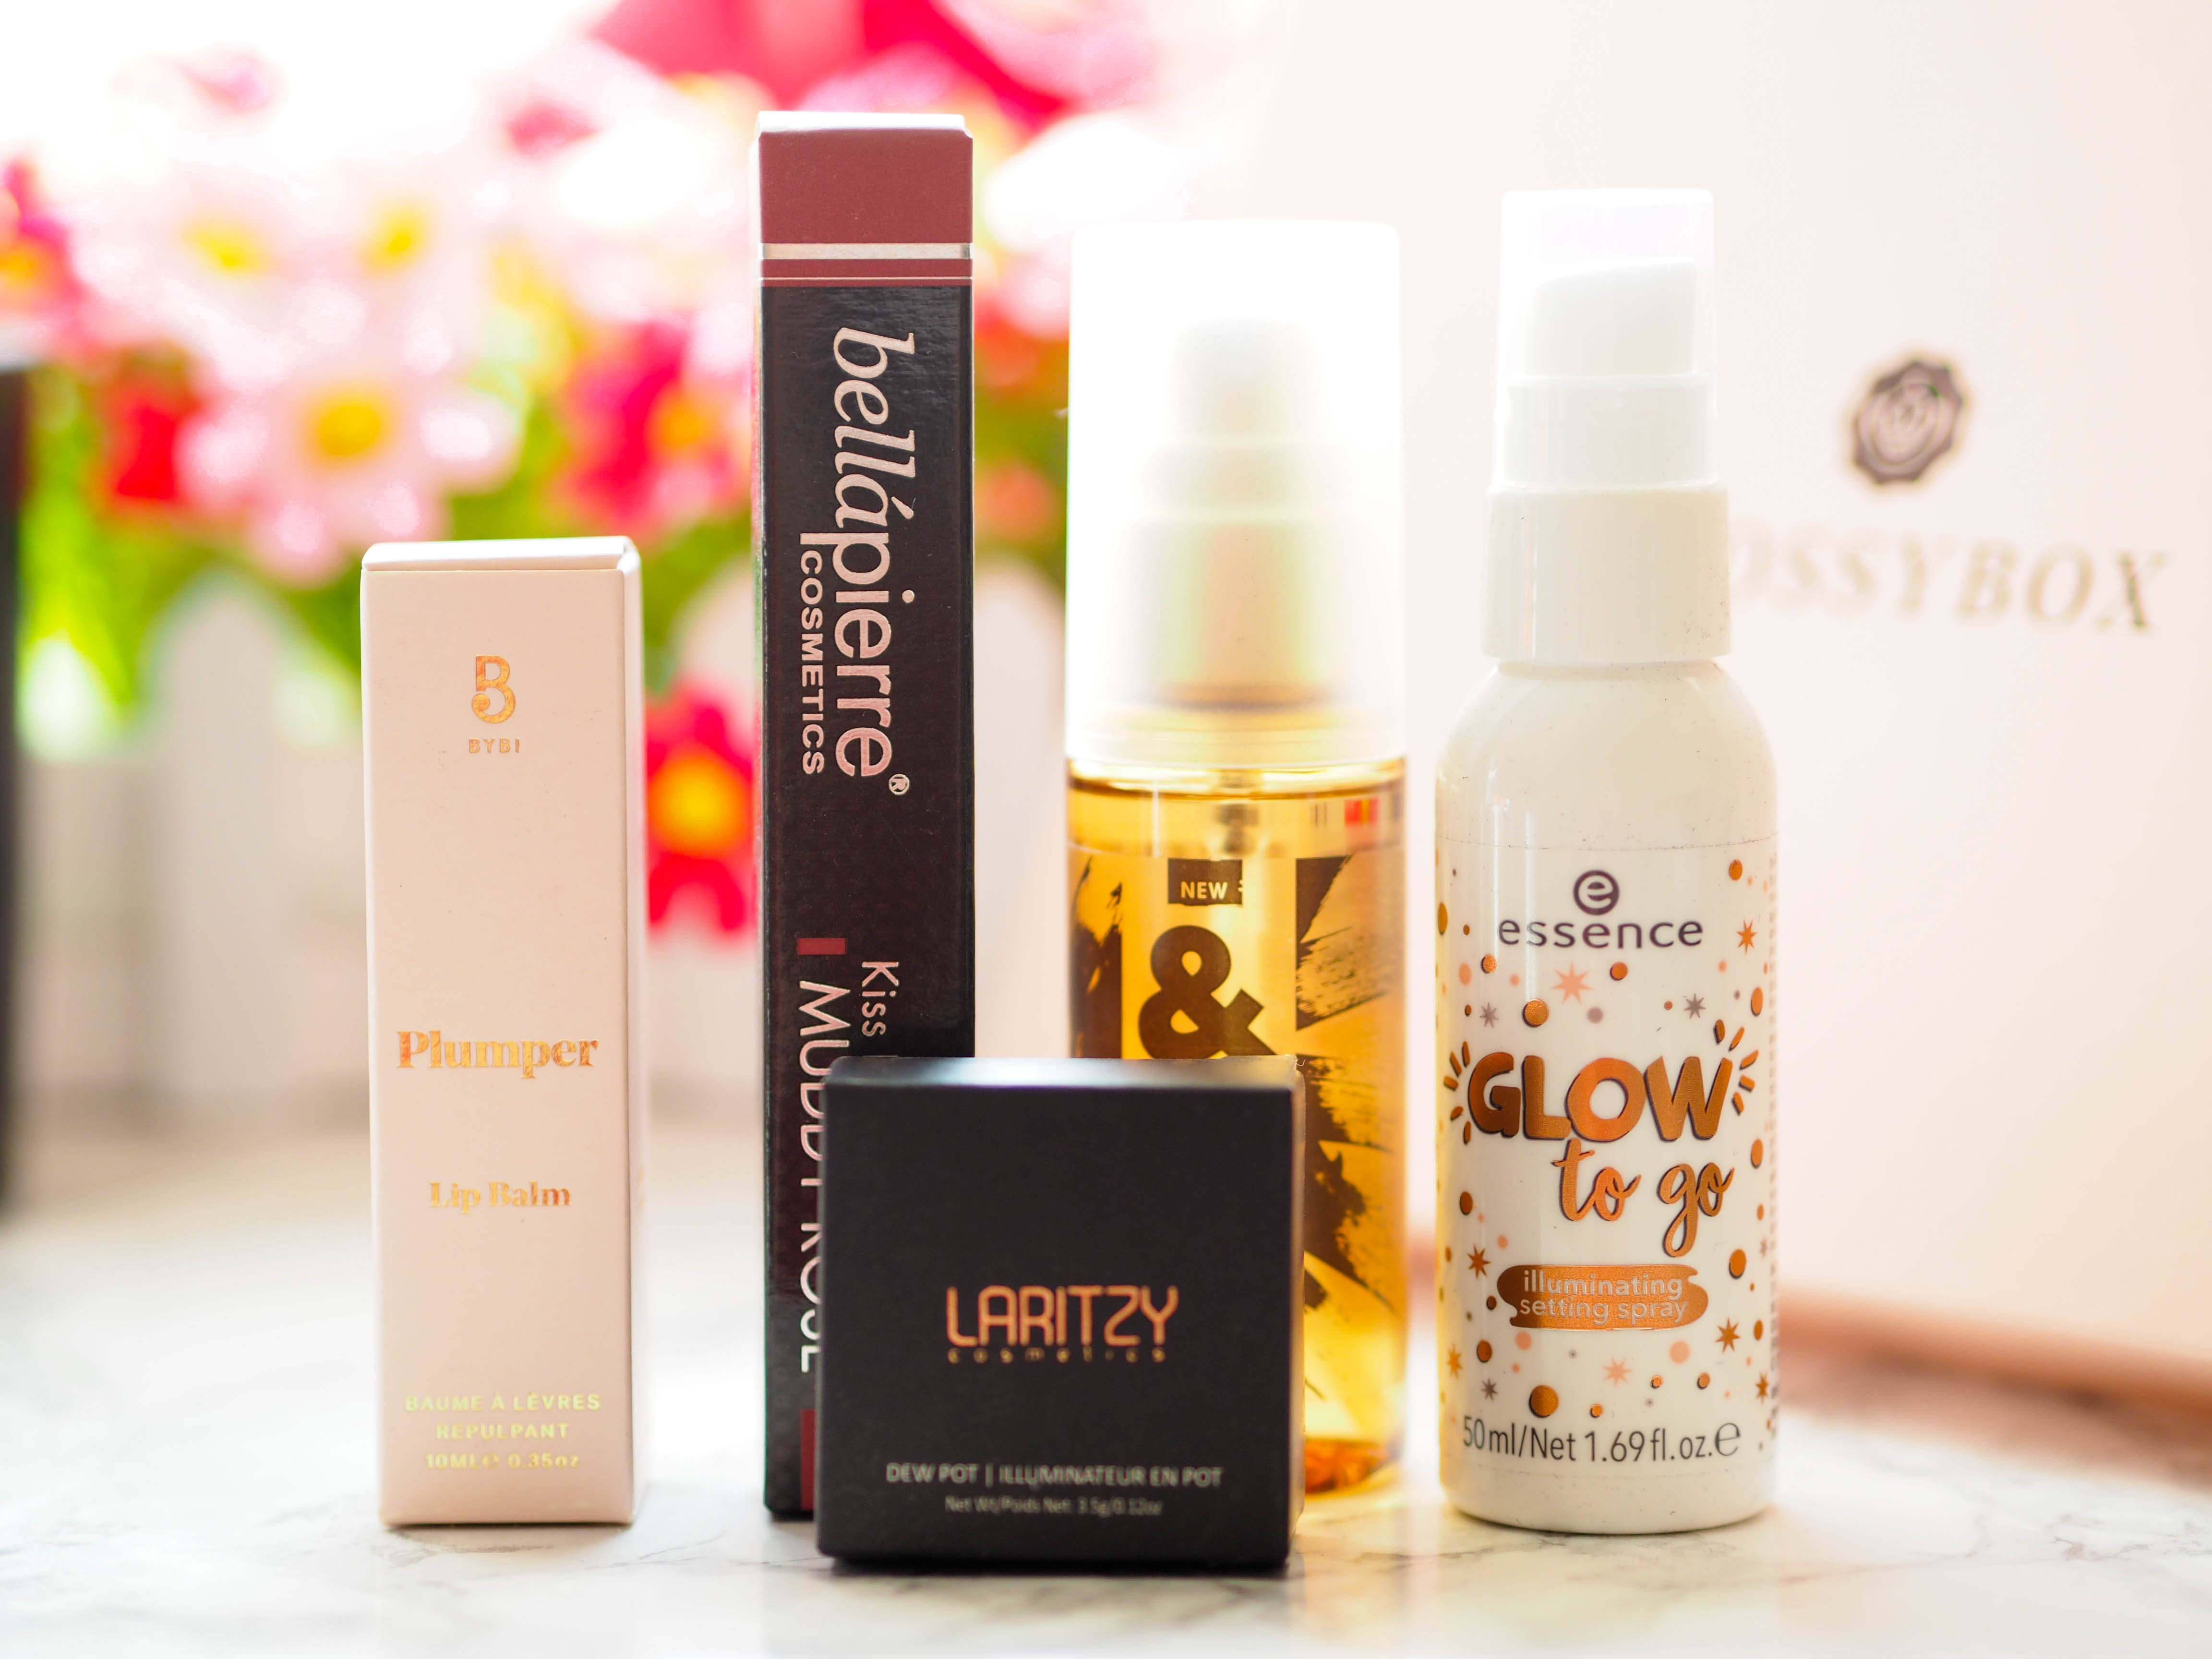 Glossybox March 2019 Contents